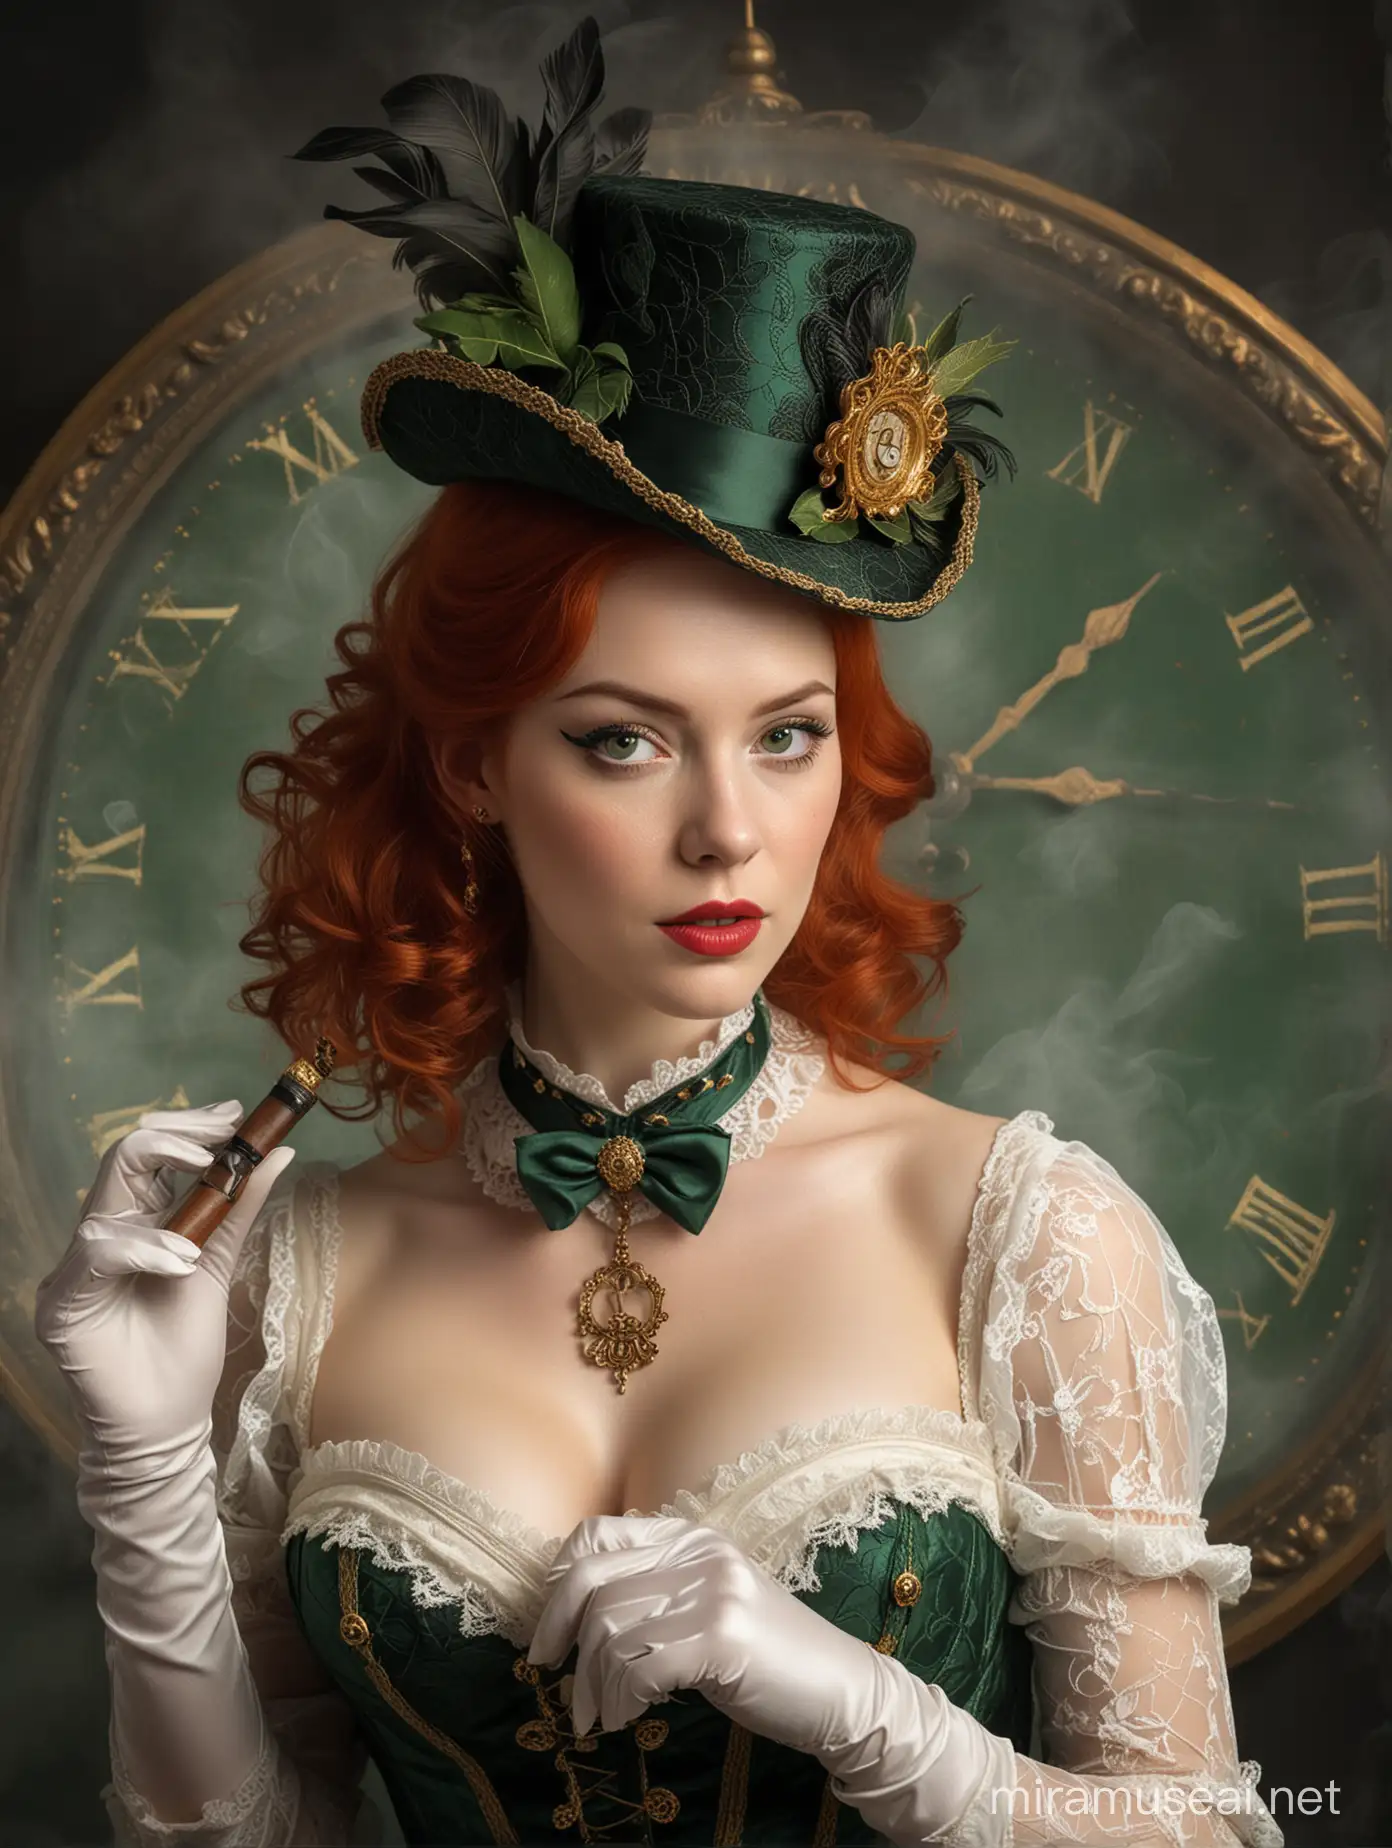 A beautiful white woman with pale skin, with red hair, in a small vintage hat, in a lace white and gold corset and silk green lacing, gloves, holding a smoking pipe in her hand, smoke around, the golden pattern of the clock face on a dark background, realism, clarity and contrast, high-quality rendering of the image and various details, noir.